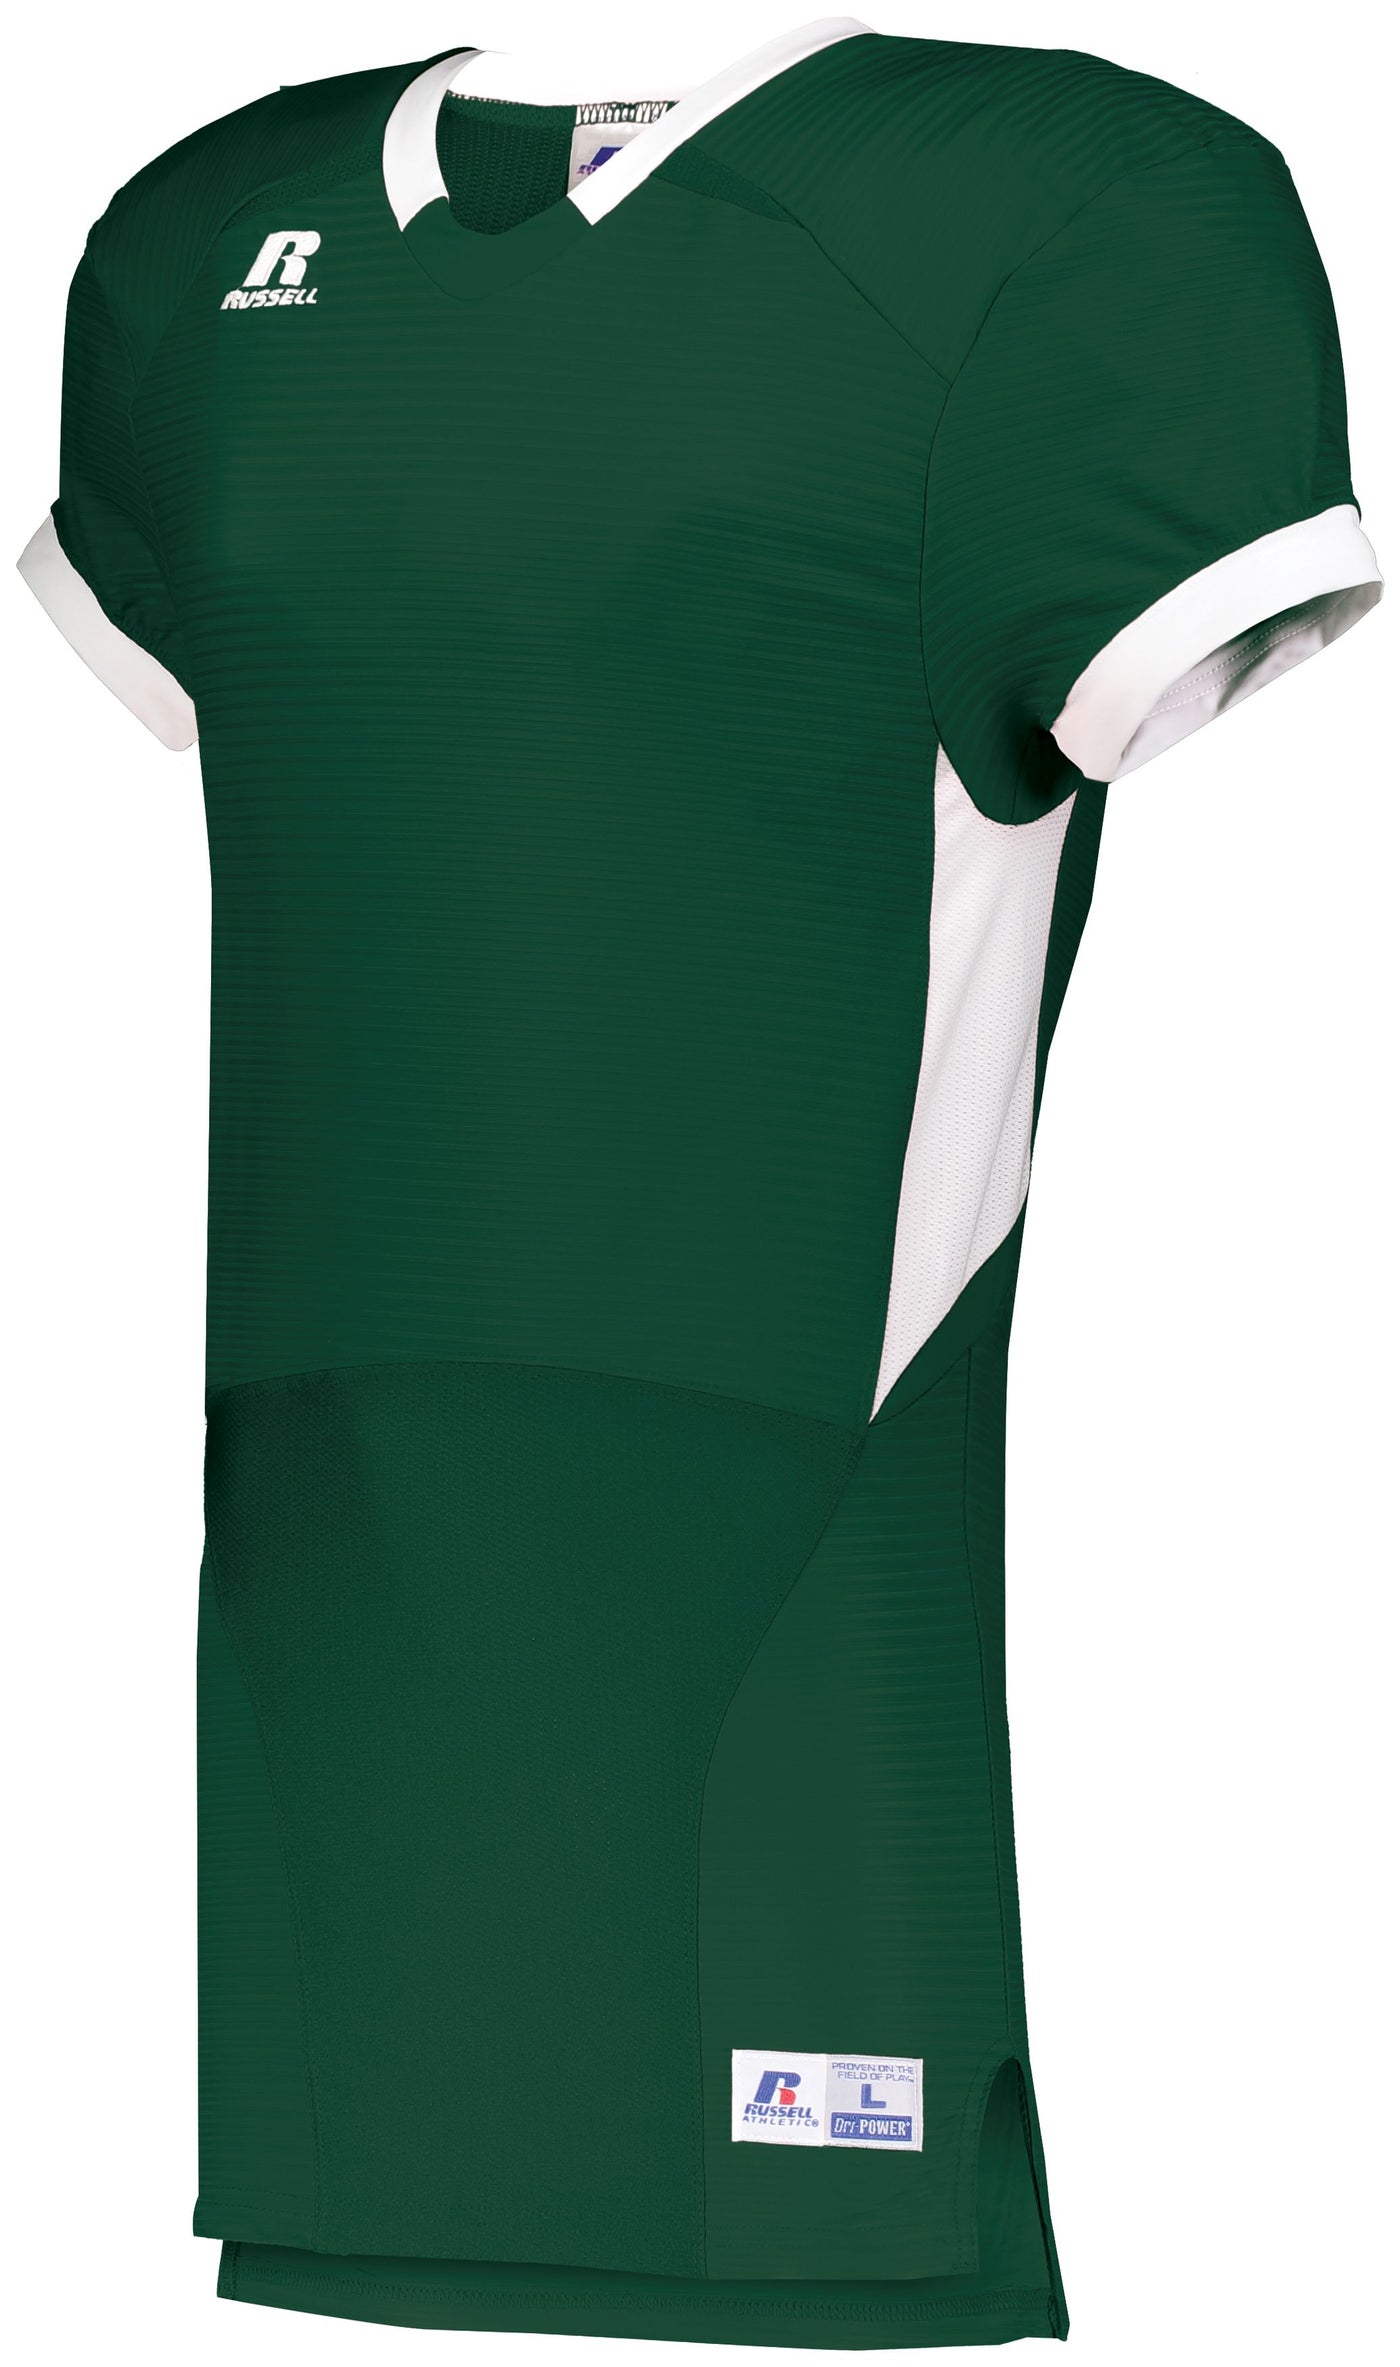 : UNLEASH YOUR TEAM'S WINNING STYLE WITH THE RUSSELL TEAM COLOR BLOCK GAME JERSEY